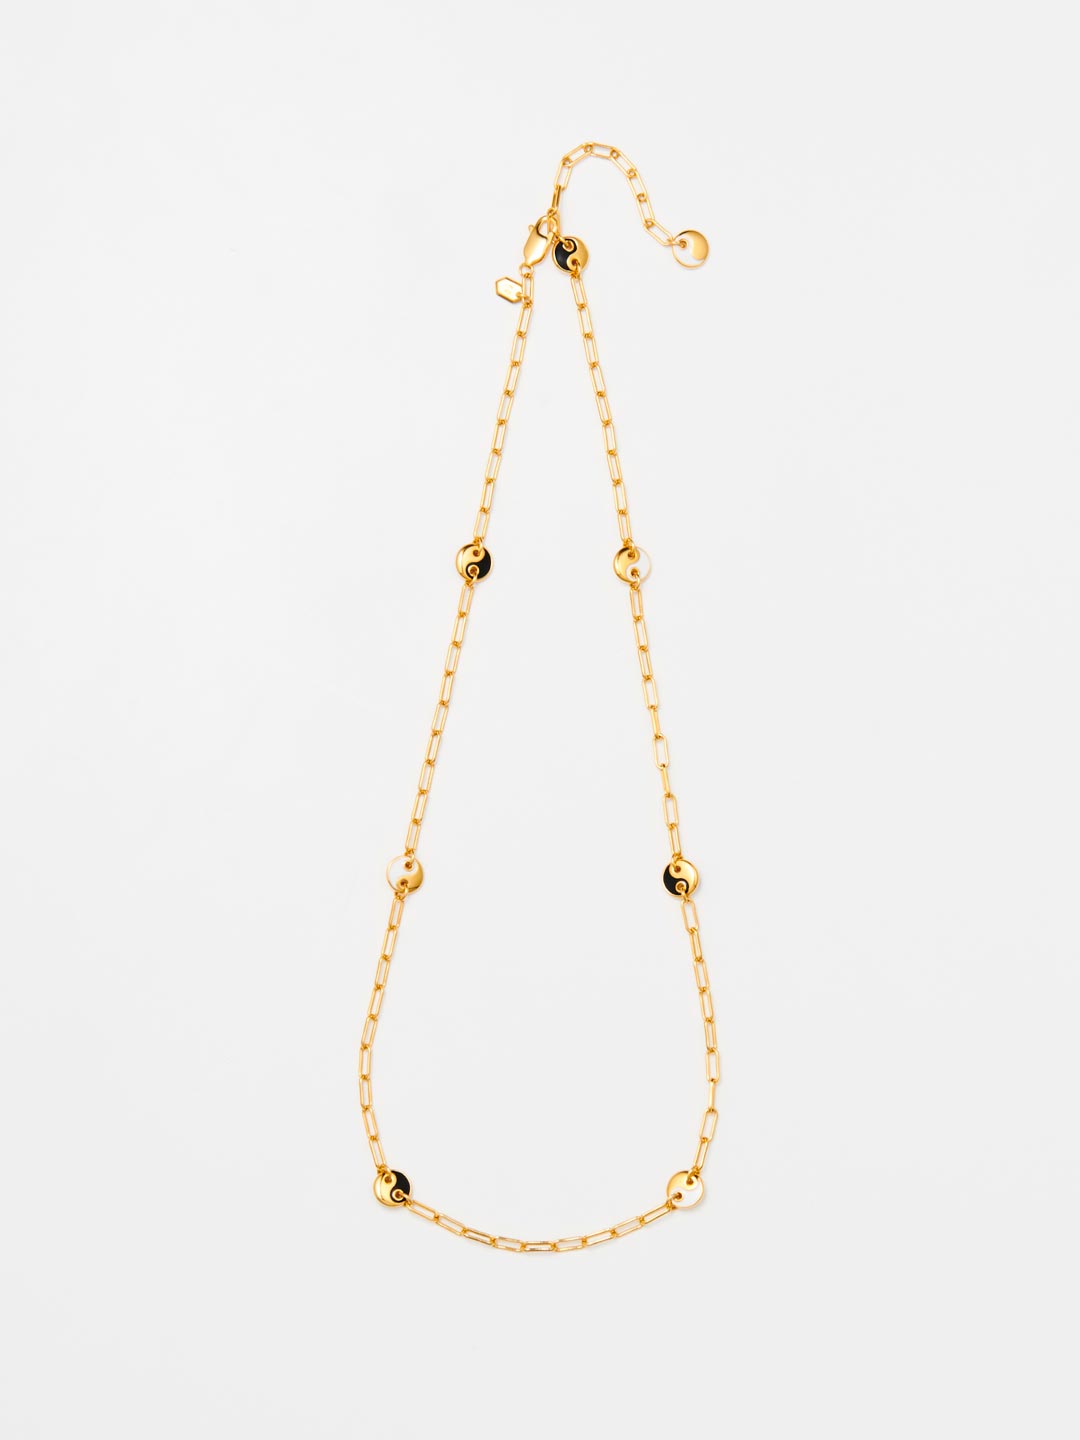 Supper Club 46 Necklace - Yellow Gold